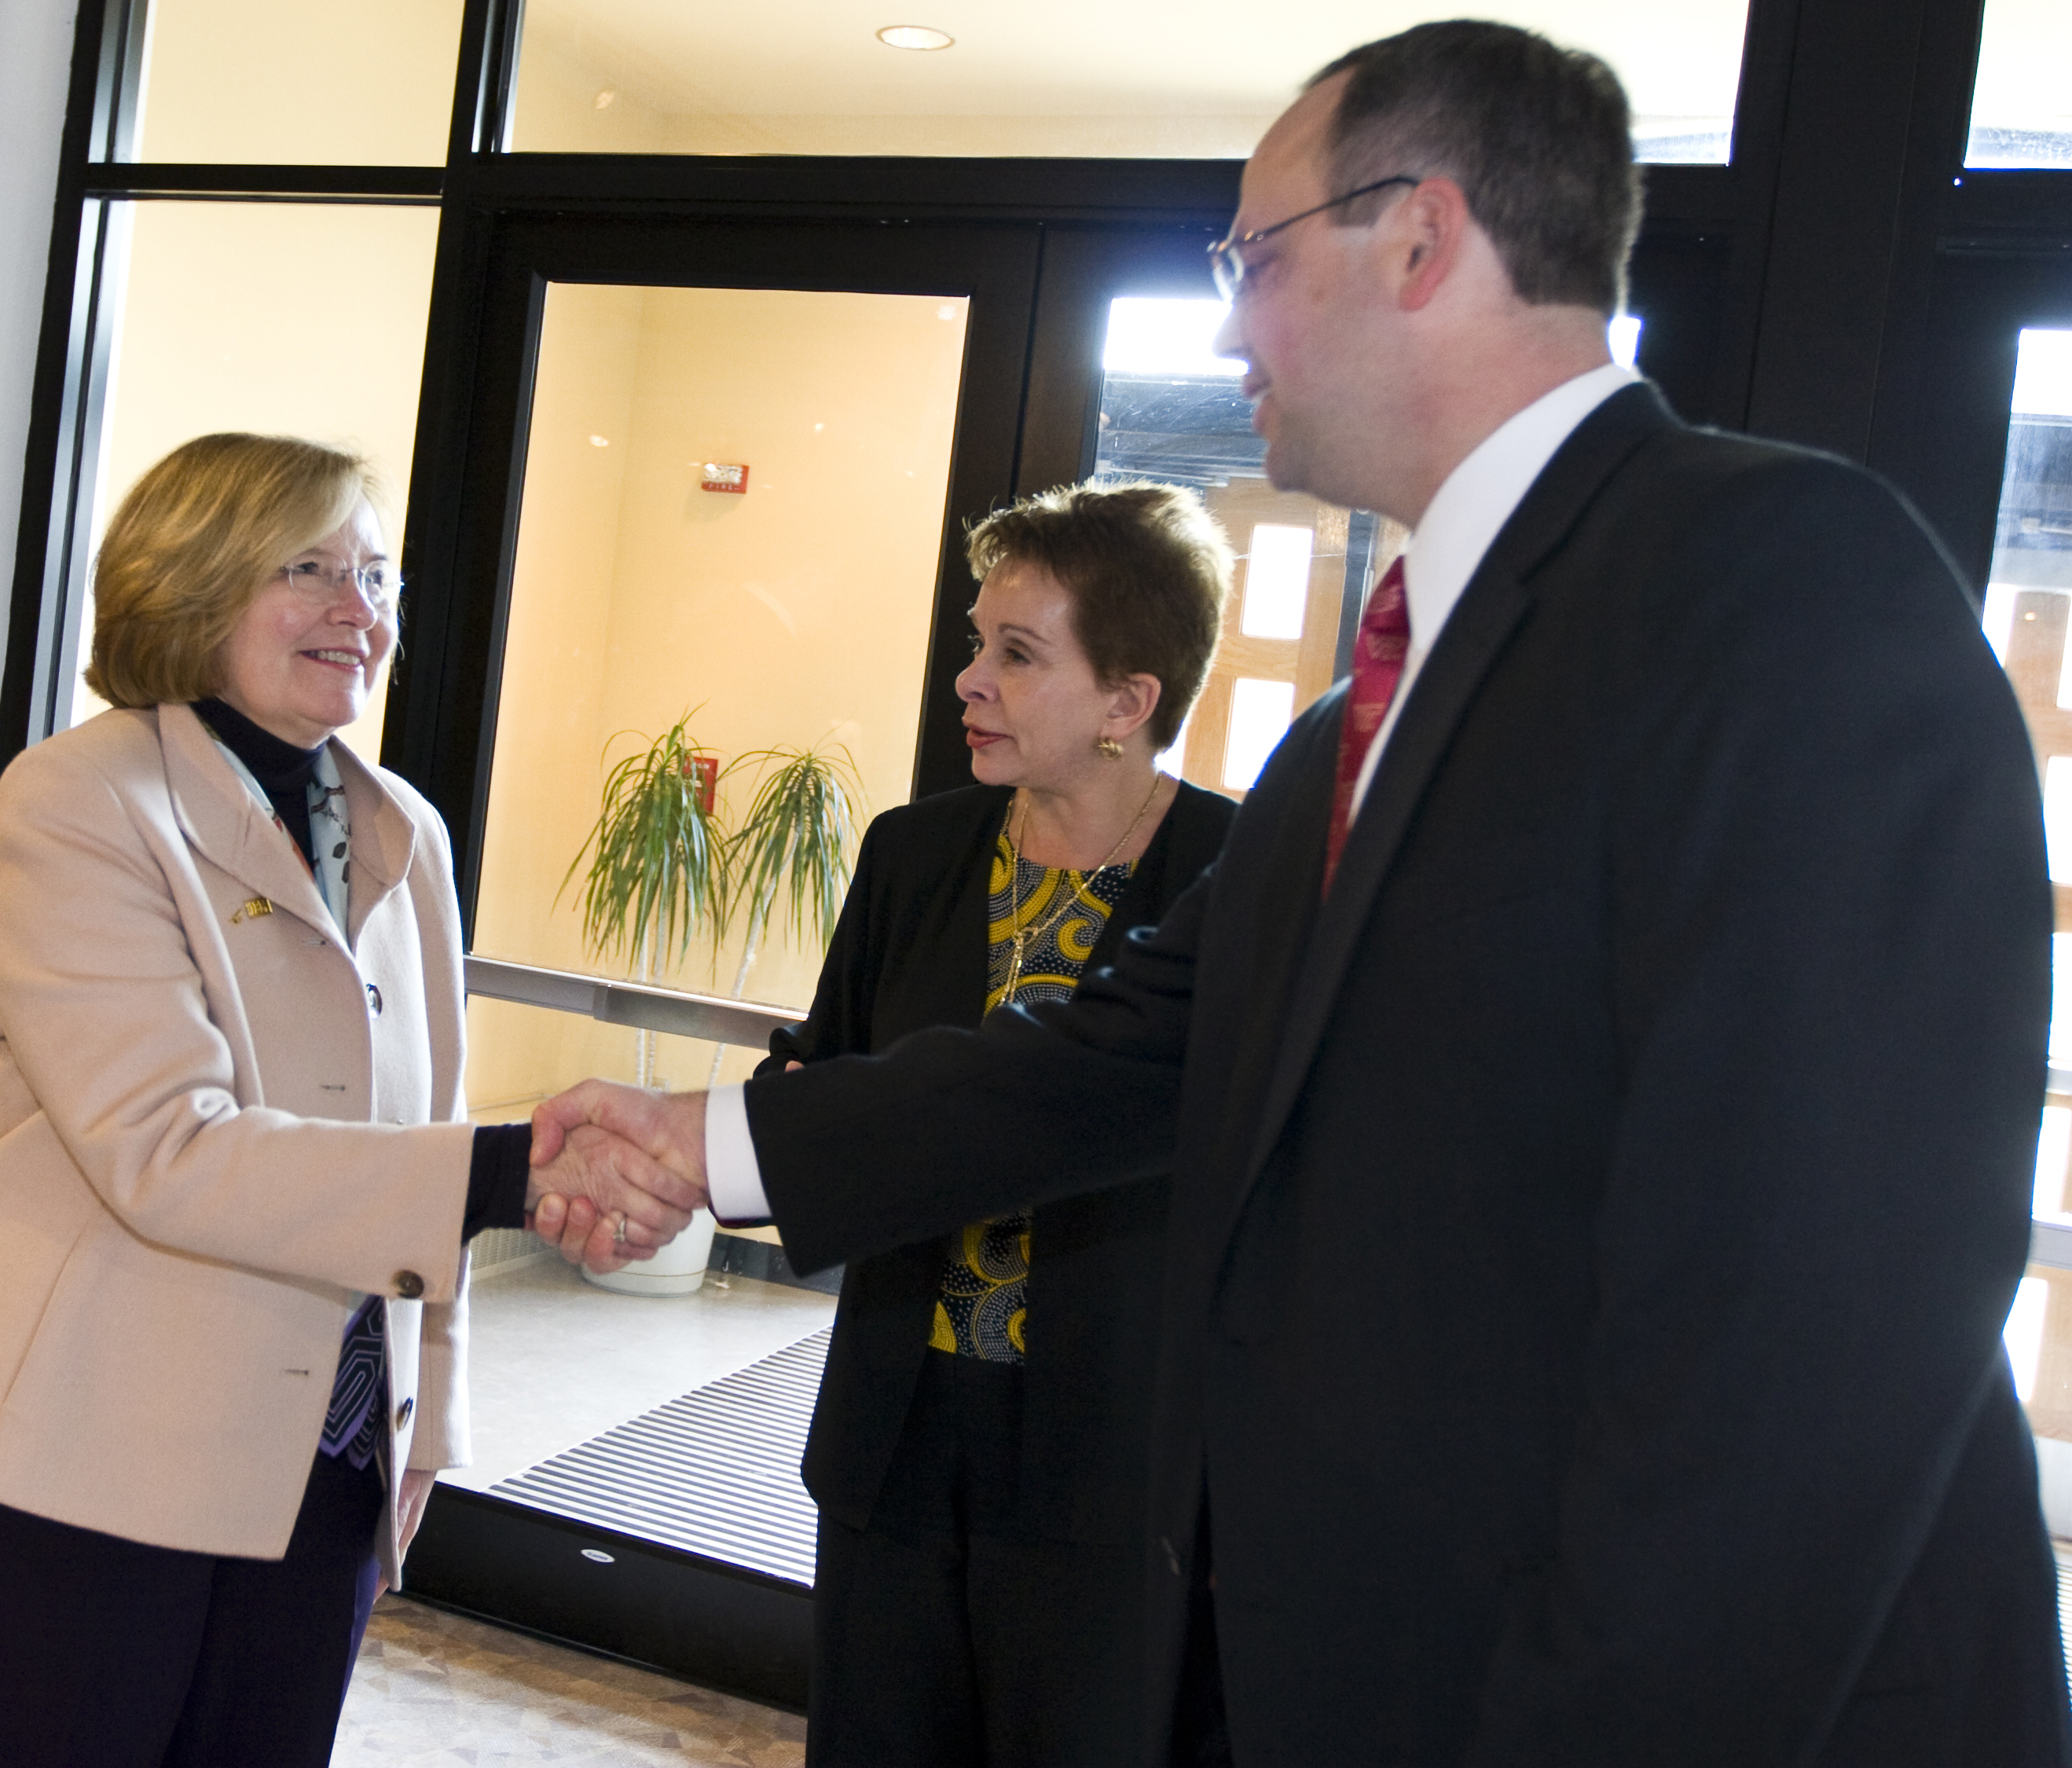 Linda Marshall (left) a partner and director of IBM's Department of Defense Systems Integration Executive Global Services, shakes hands with Stefan Duma, professor of mechanical engineering at Virginia Tech. Deborah Hamilton (middle) is the associate director, corporate and foundation relations, College of Engineering, Virginia Tech. IBM is a critical partner, along with Renesola, and Grundfos Pumps, on the Virginia Tech engineering project to provide electricity to a remote medical clinic in Kenya.